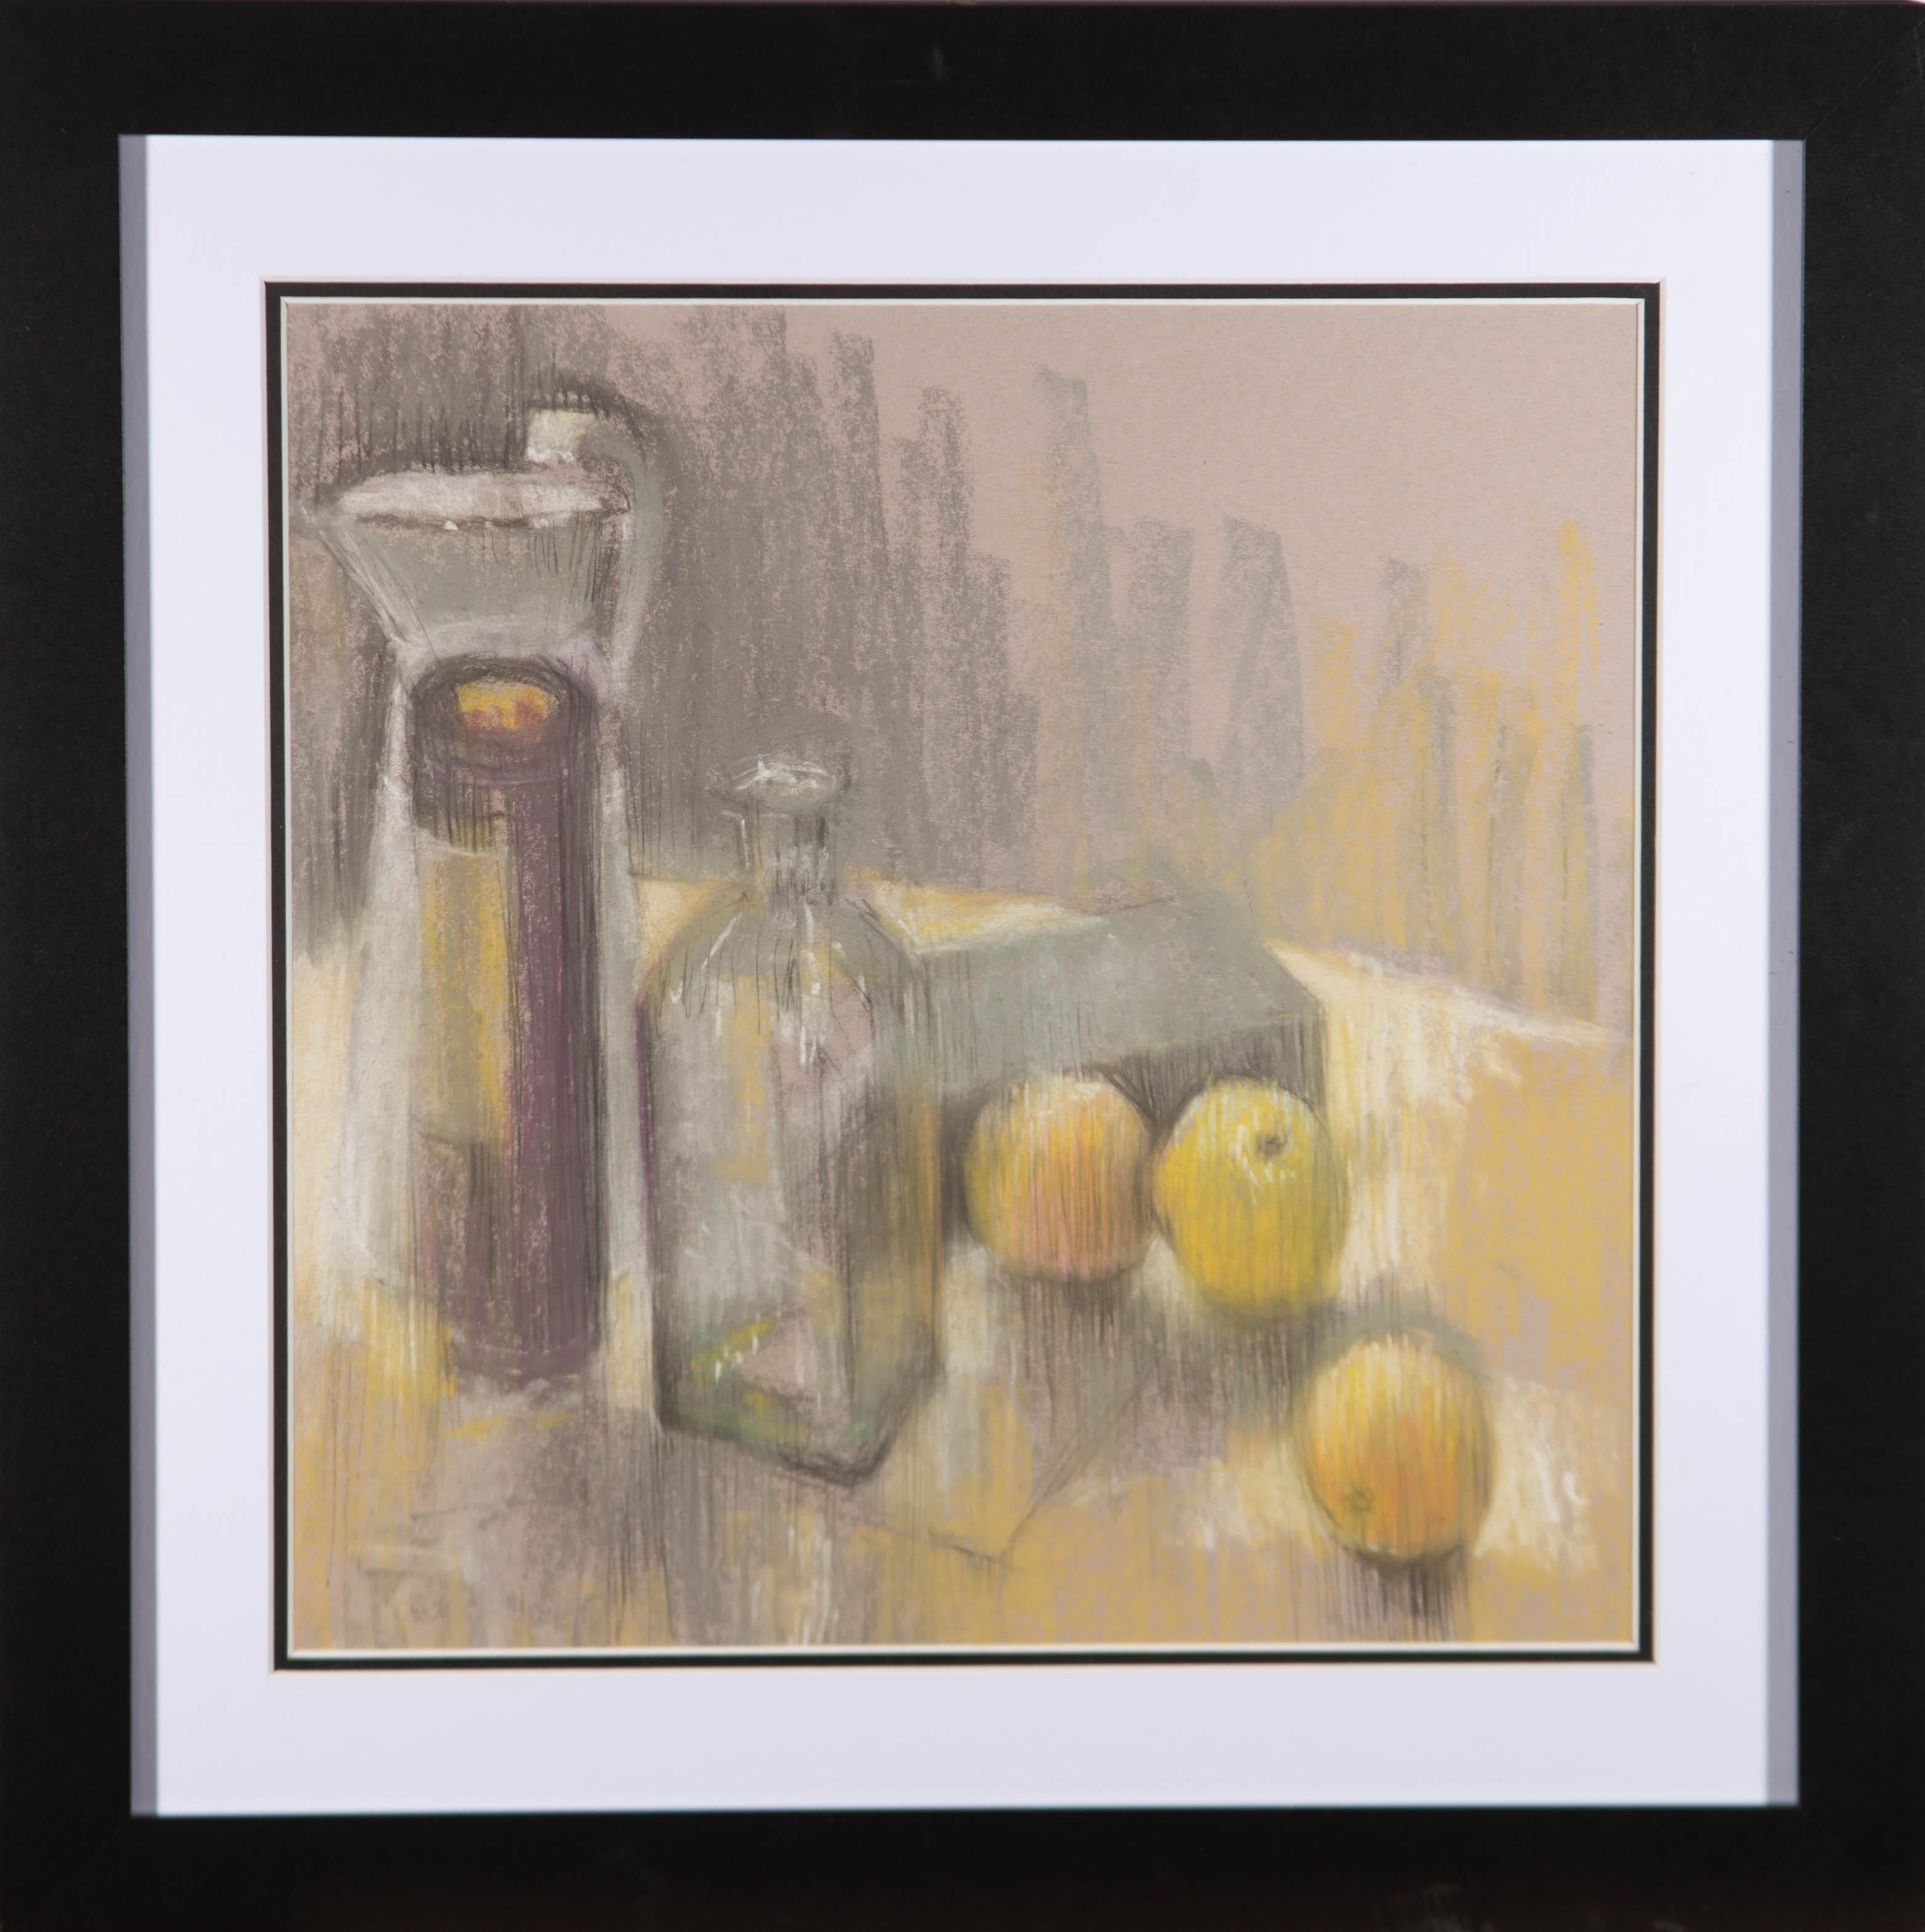 Unknown Still-Life - Val Hamer - Contemporary Pastel, Glass Bottle and Green Apples